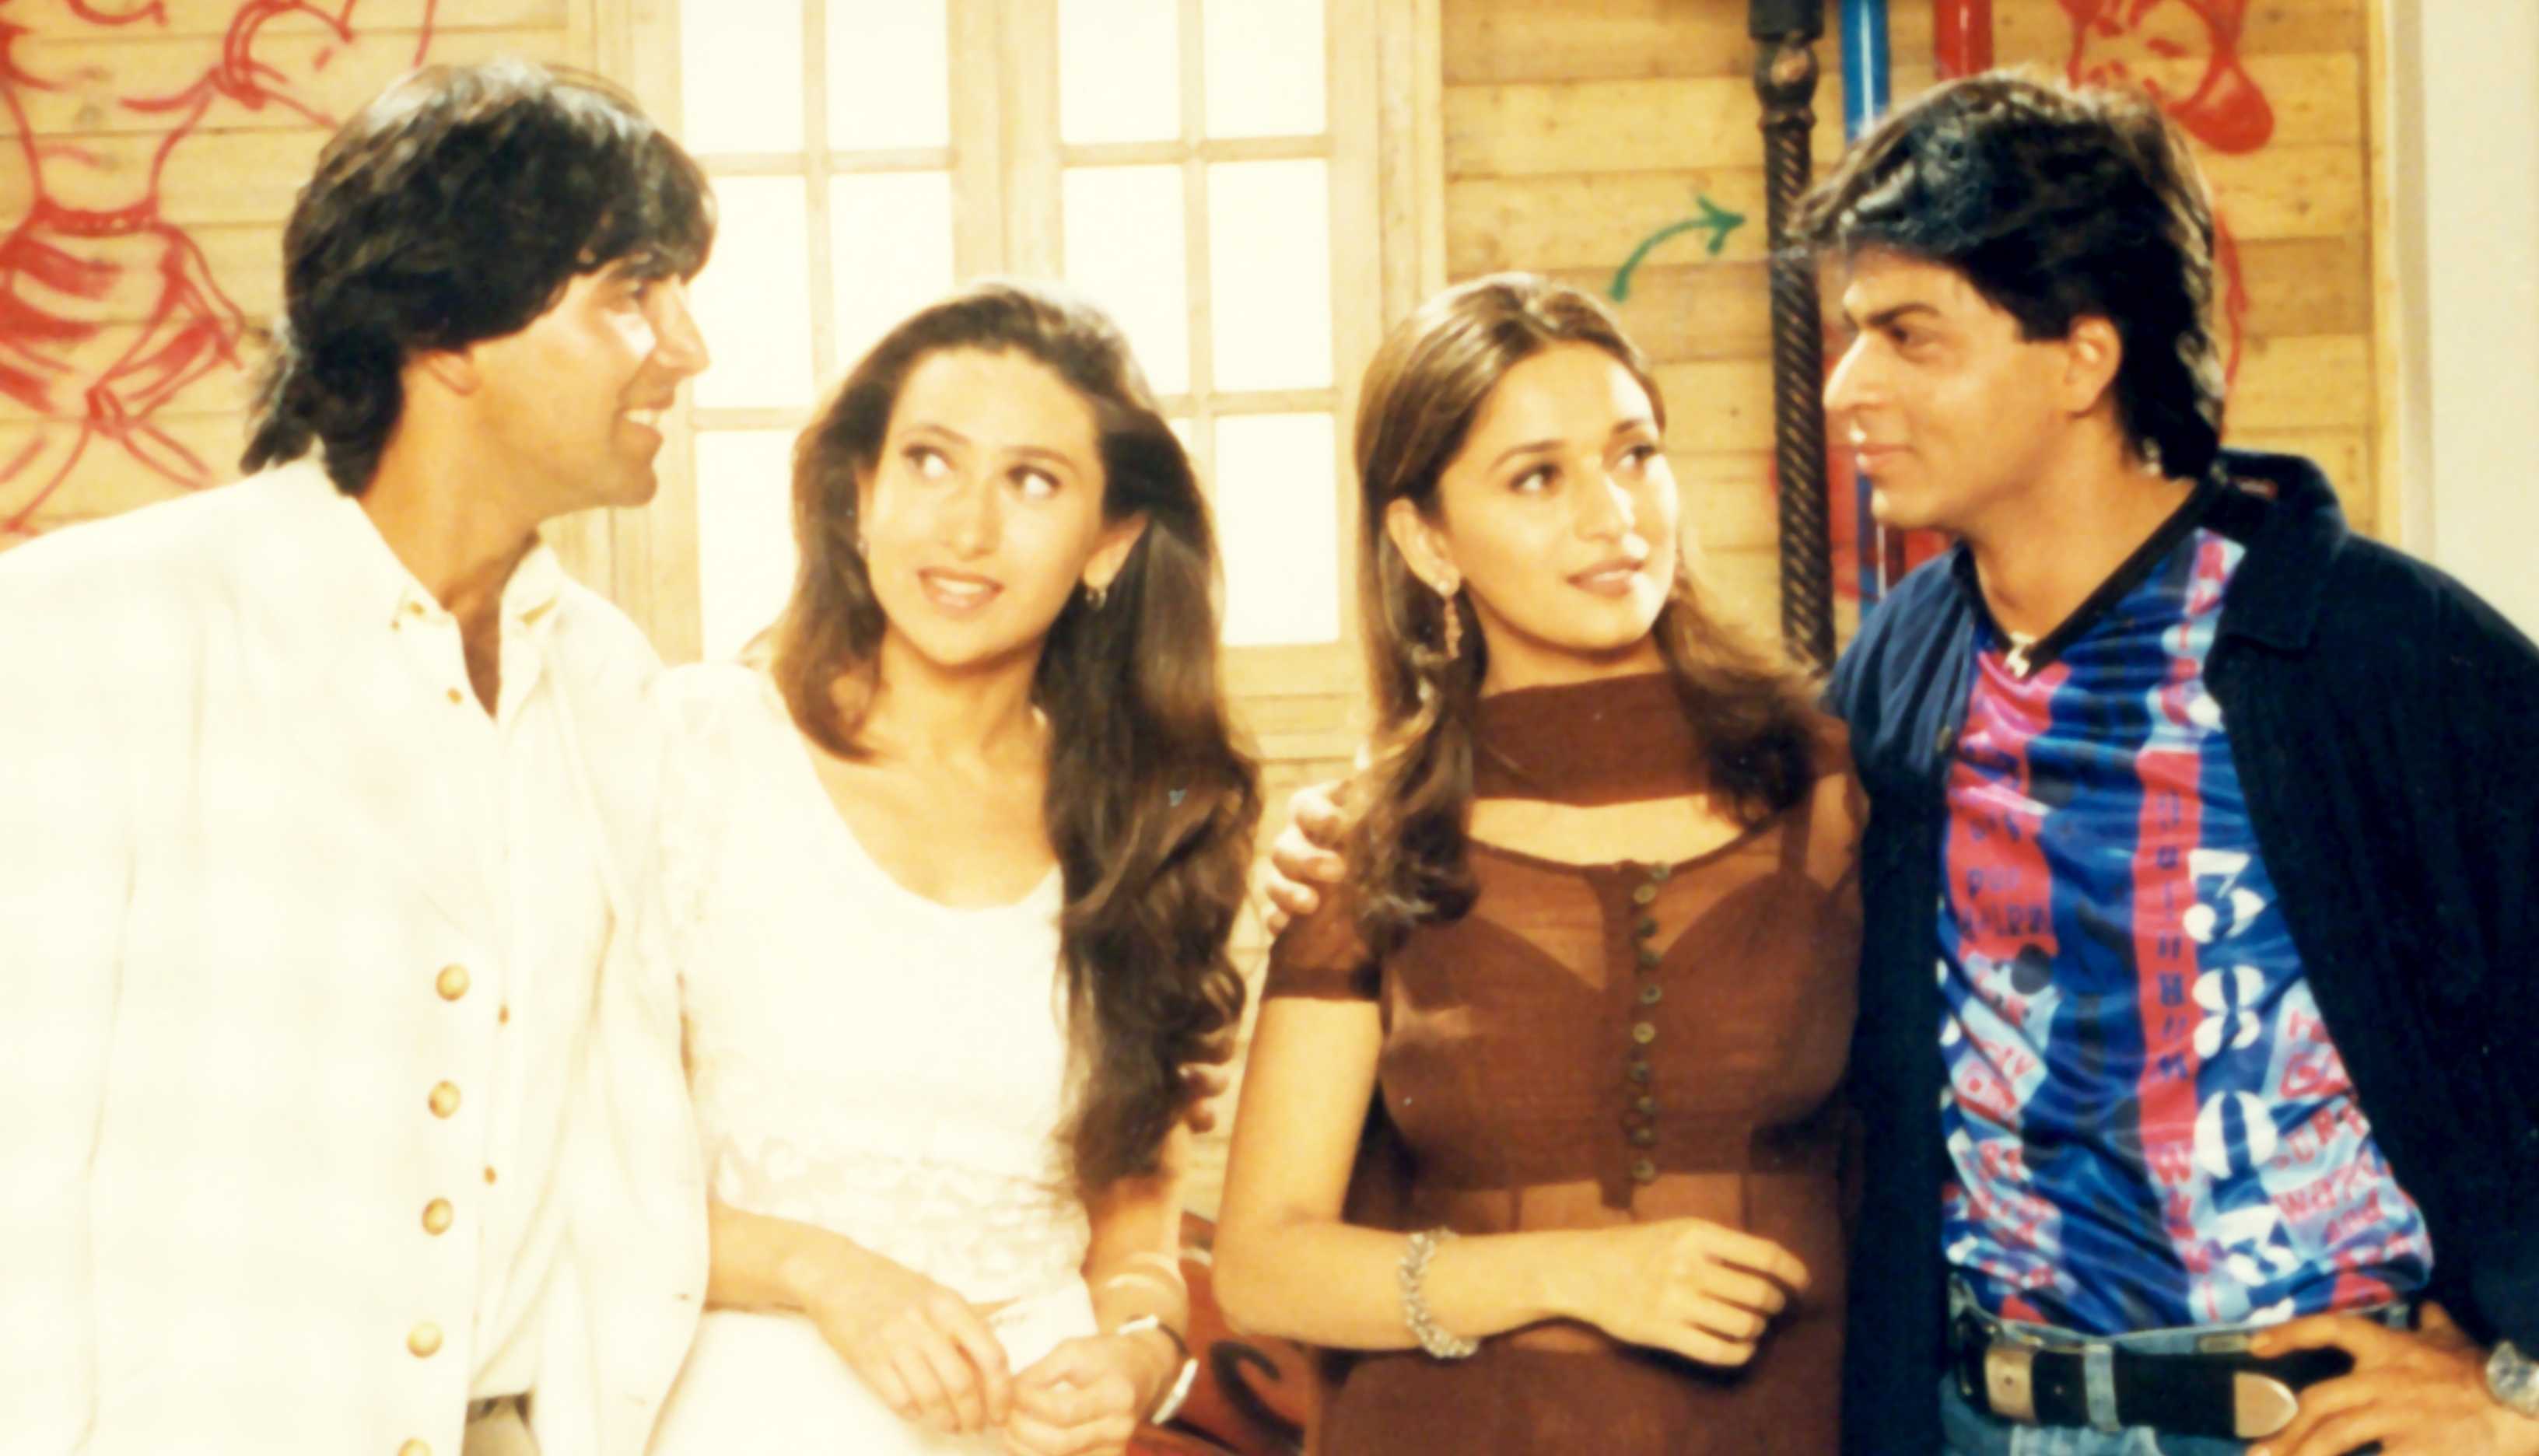 Dil To Pagal Hai turns 25: From Akshay Kumar not getting paid to Shah Rukh almost losing the film, check out some shocking facts